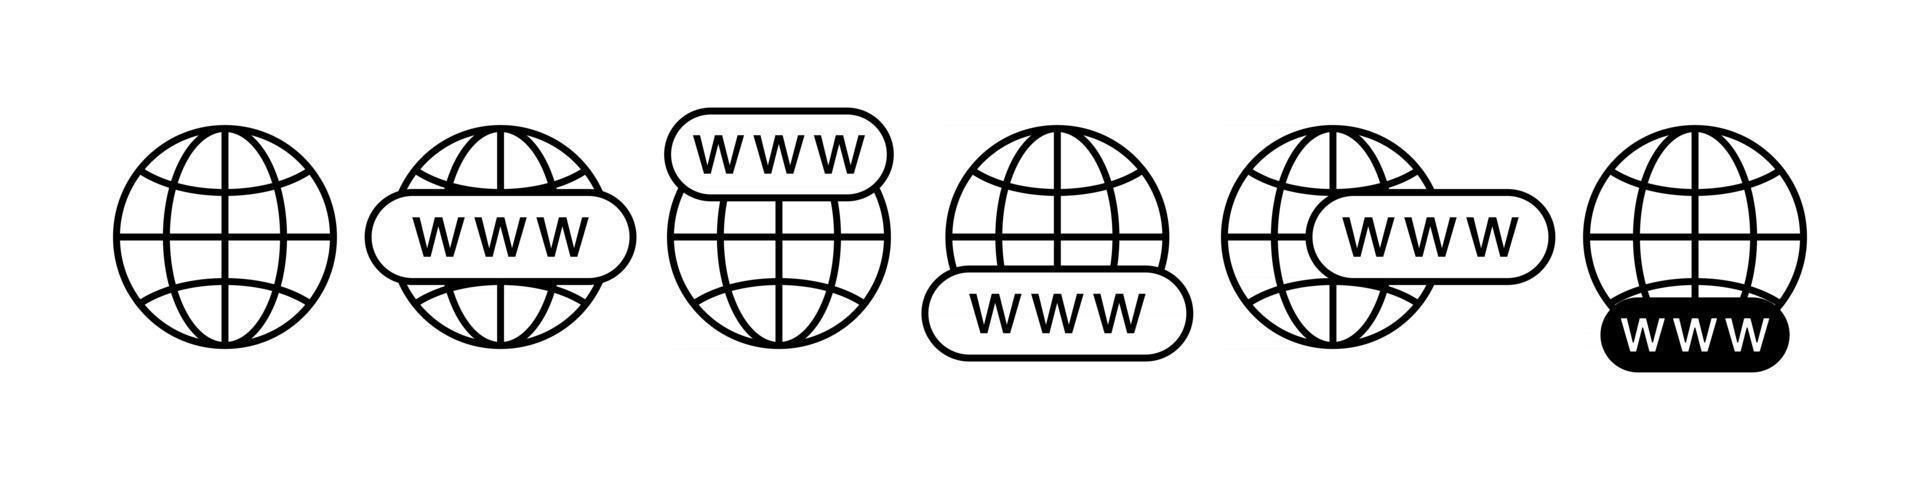 Internet WWW search icons set vector